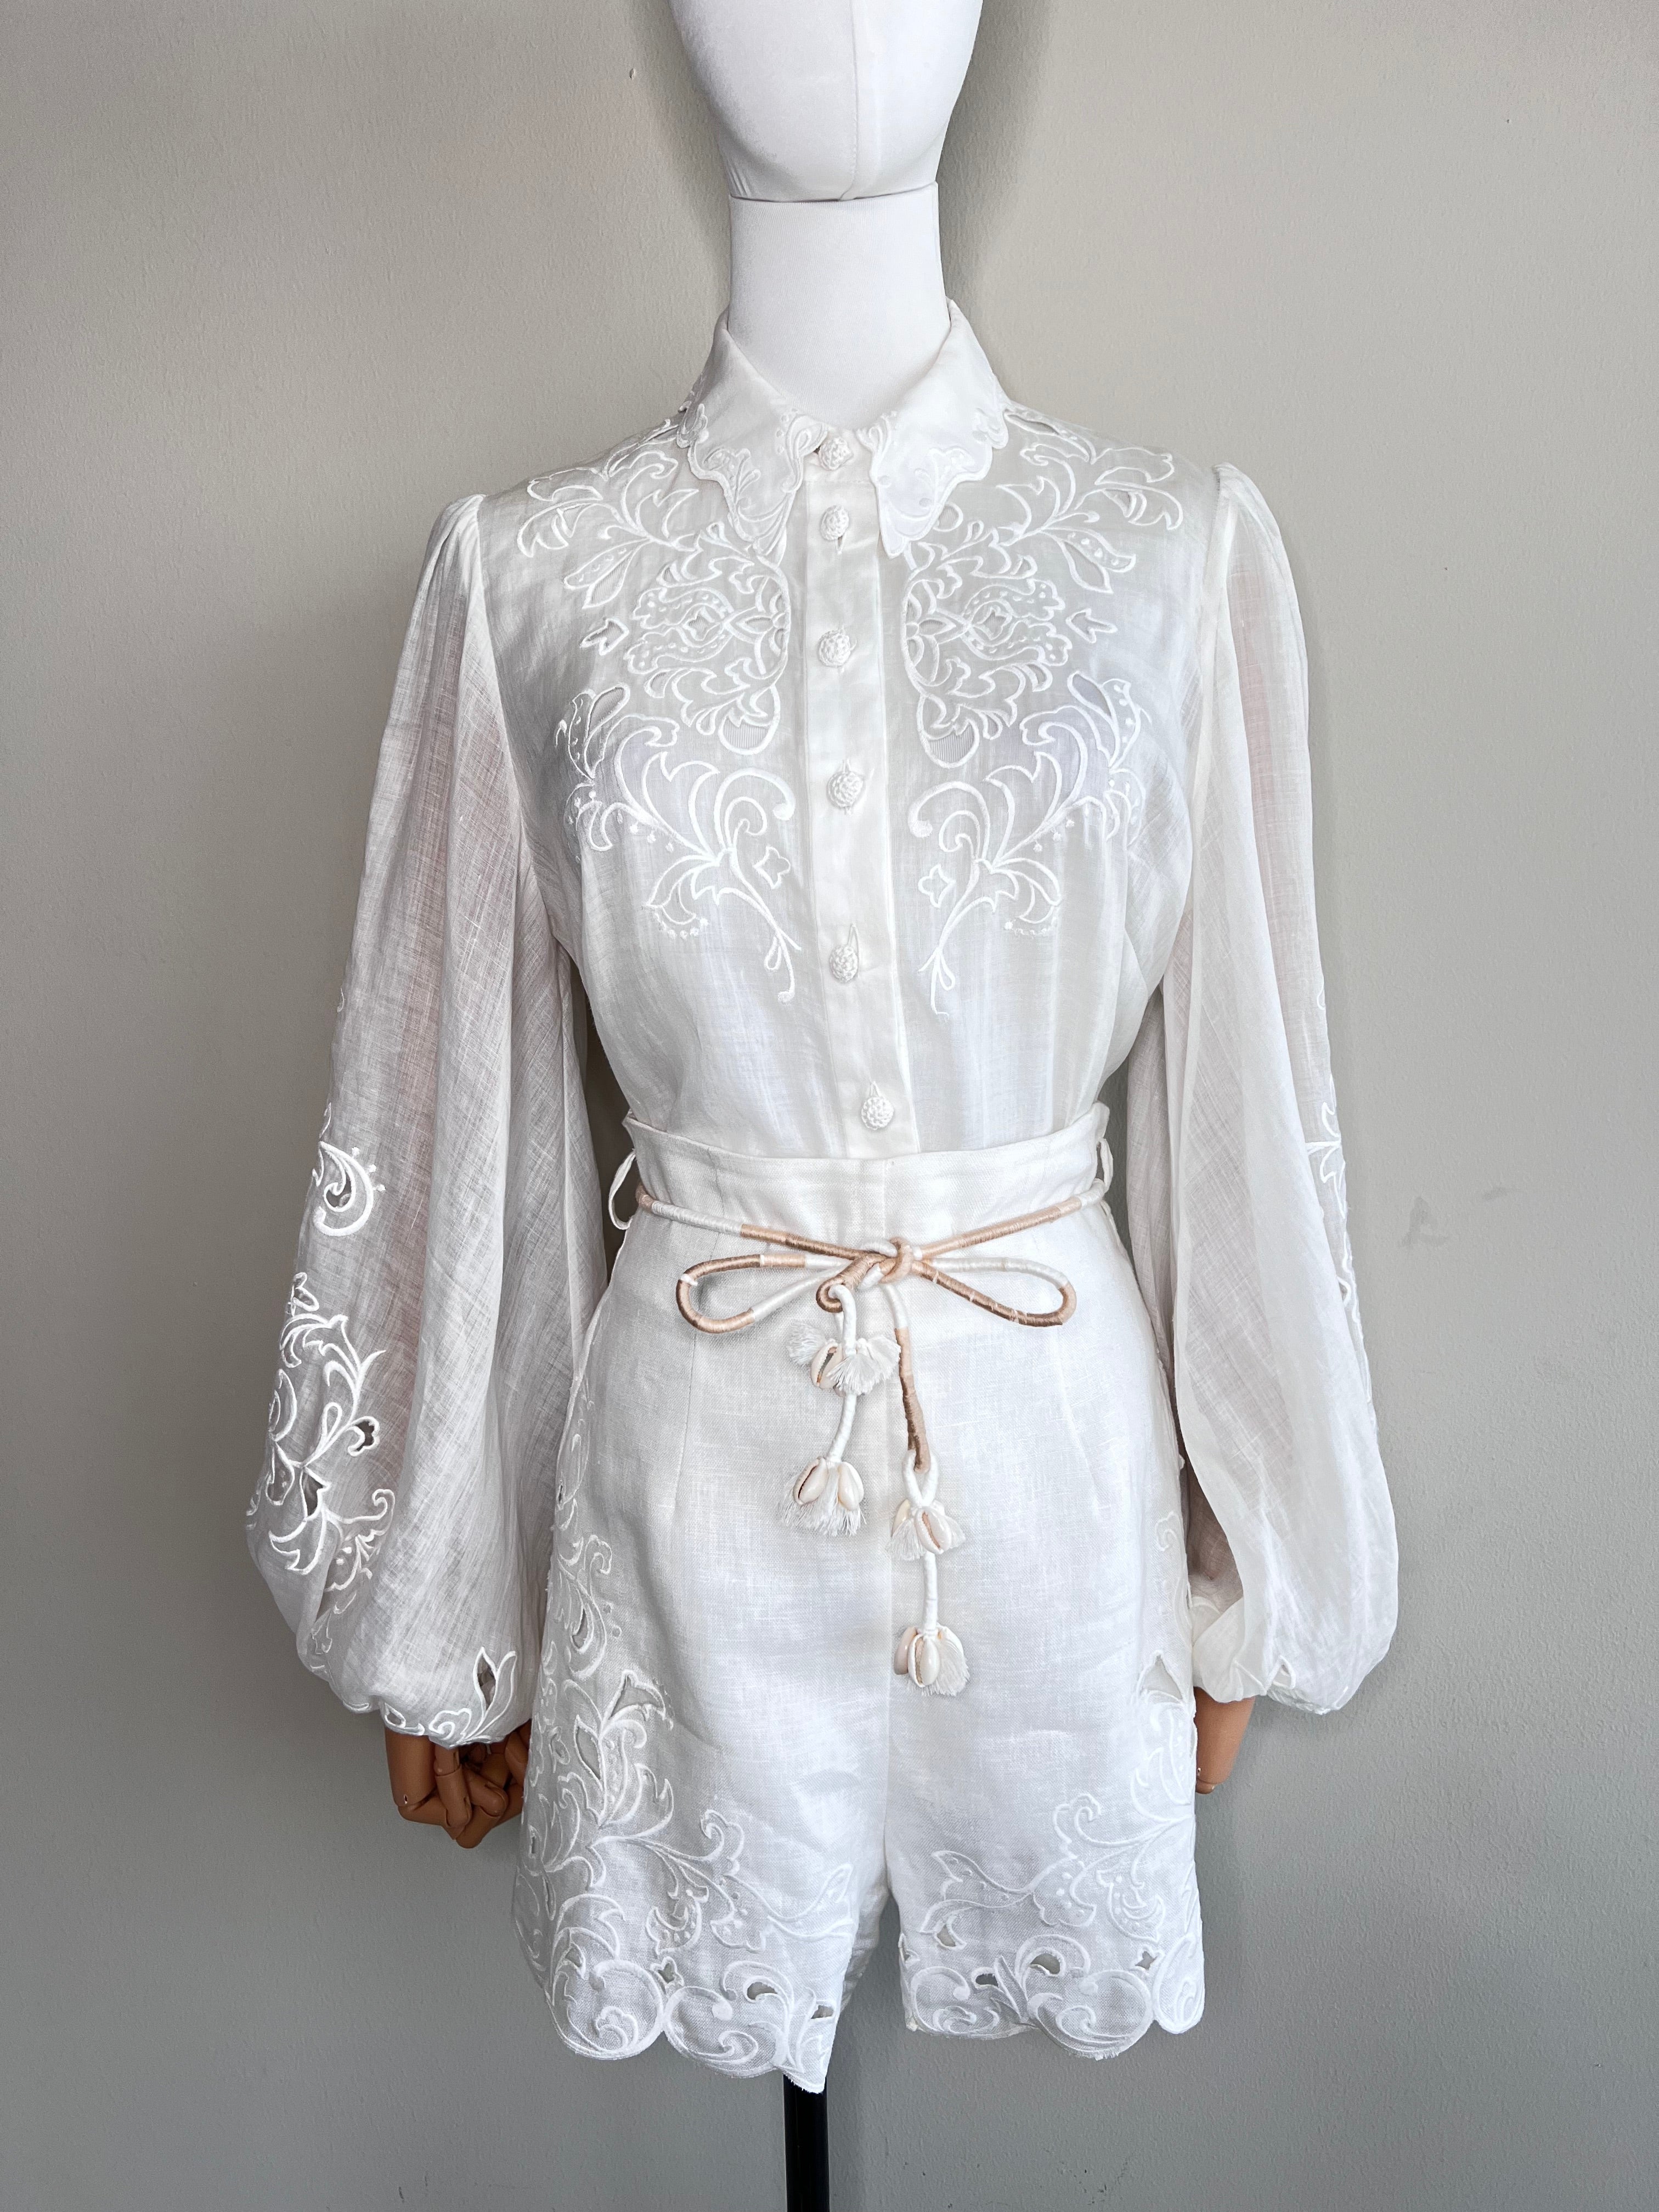 A set of white nina embroidered longsleeve and shorts - ZIMMERMANN